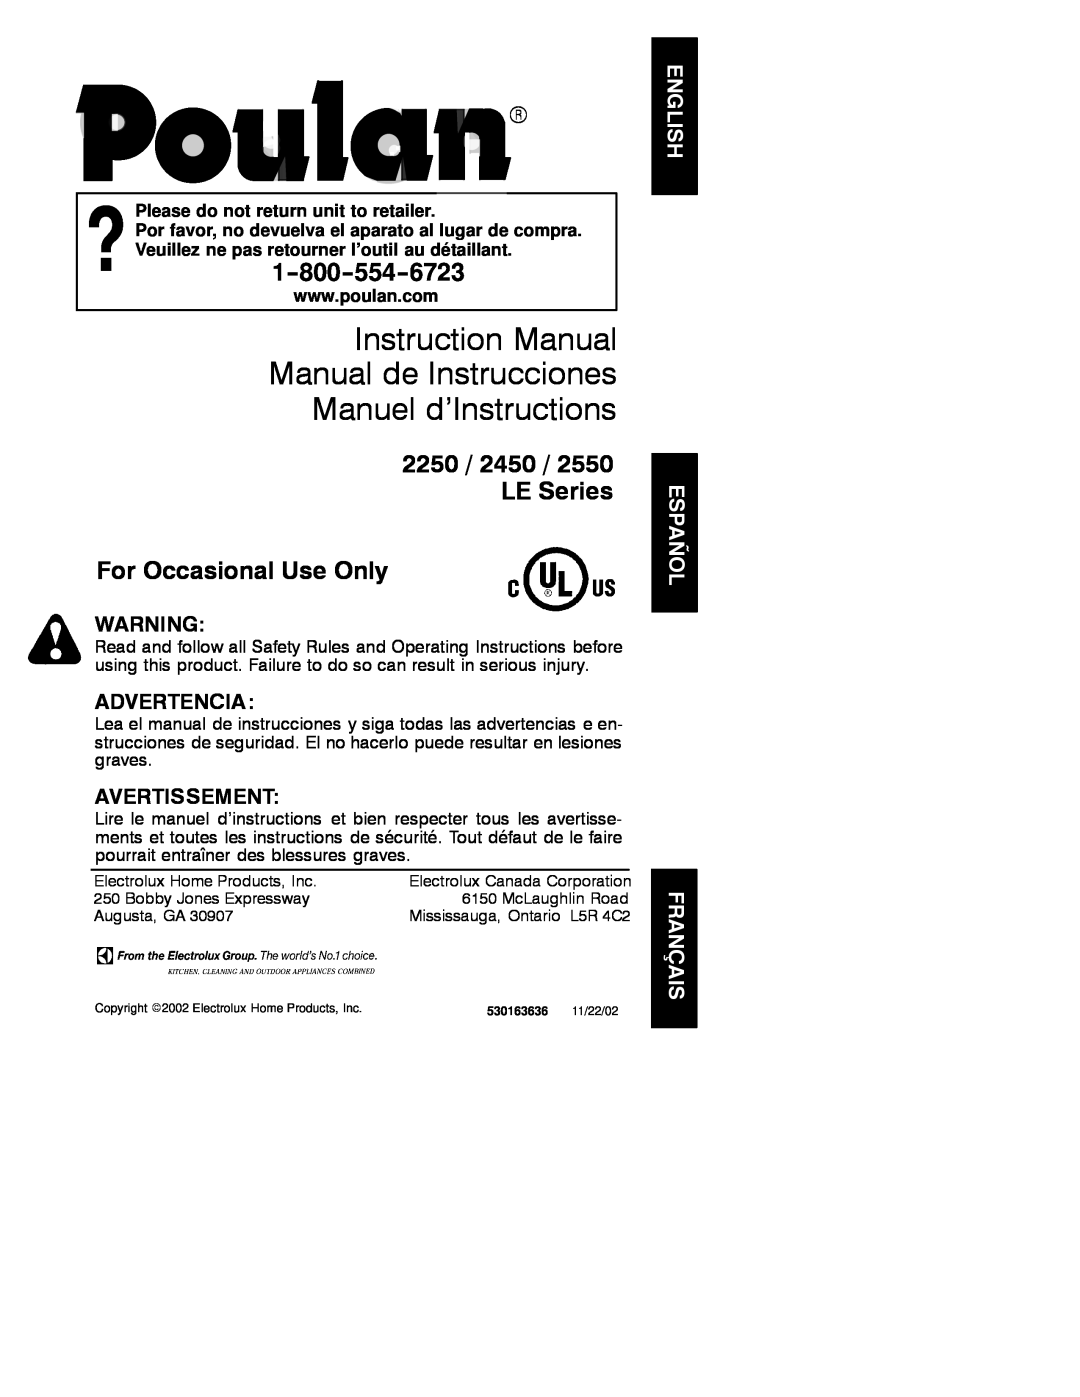 Poulan 530163636 instruction manual Manuel d’Instructions, 2250 / 2450 / 2550 LE Series, For Occasional Use Only 